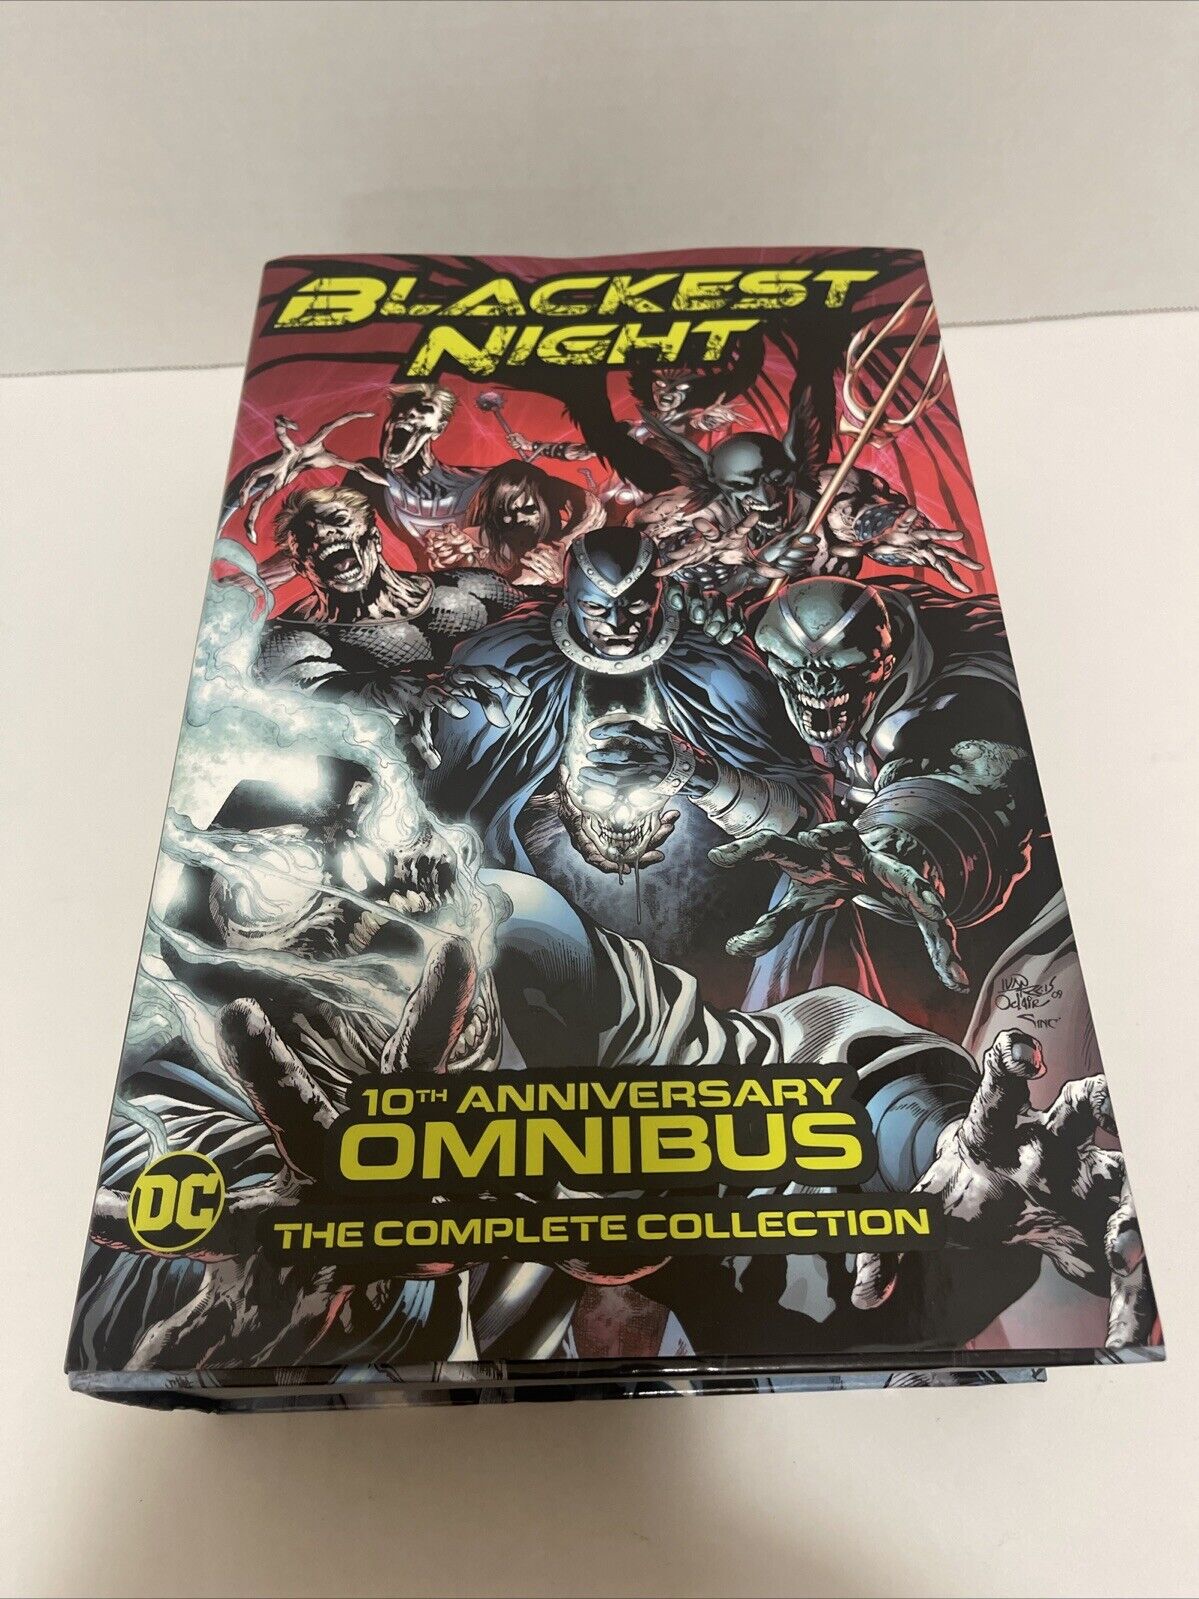 Blackest Night 10th Anniversary Omnibus Complete Collection DC.